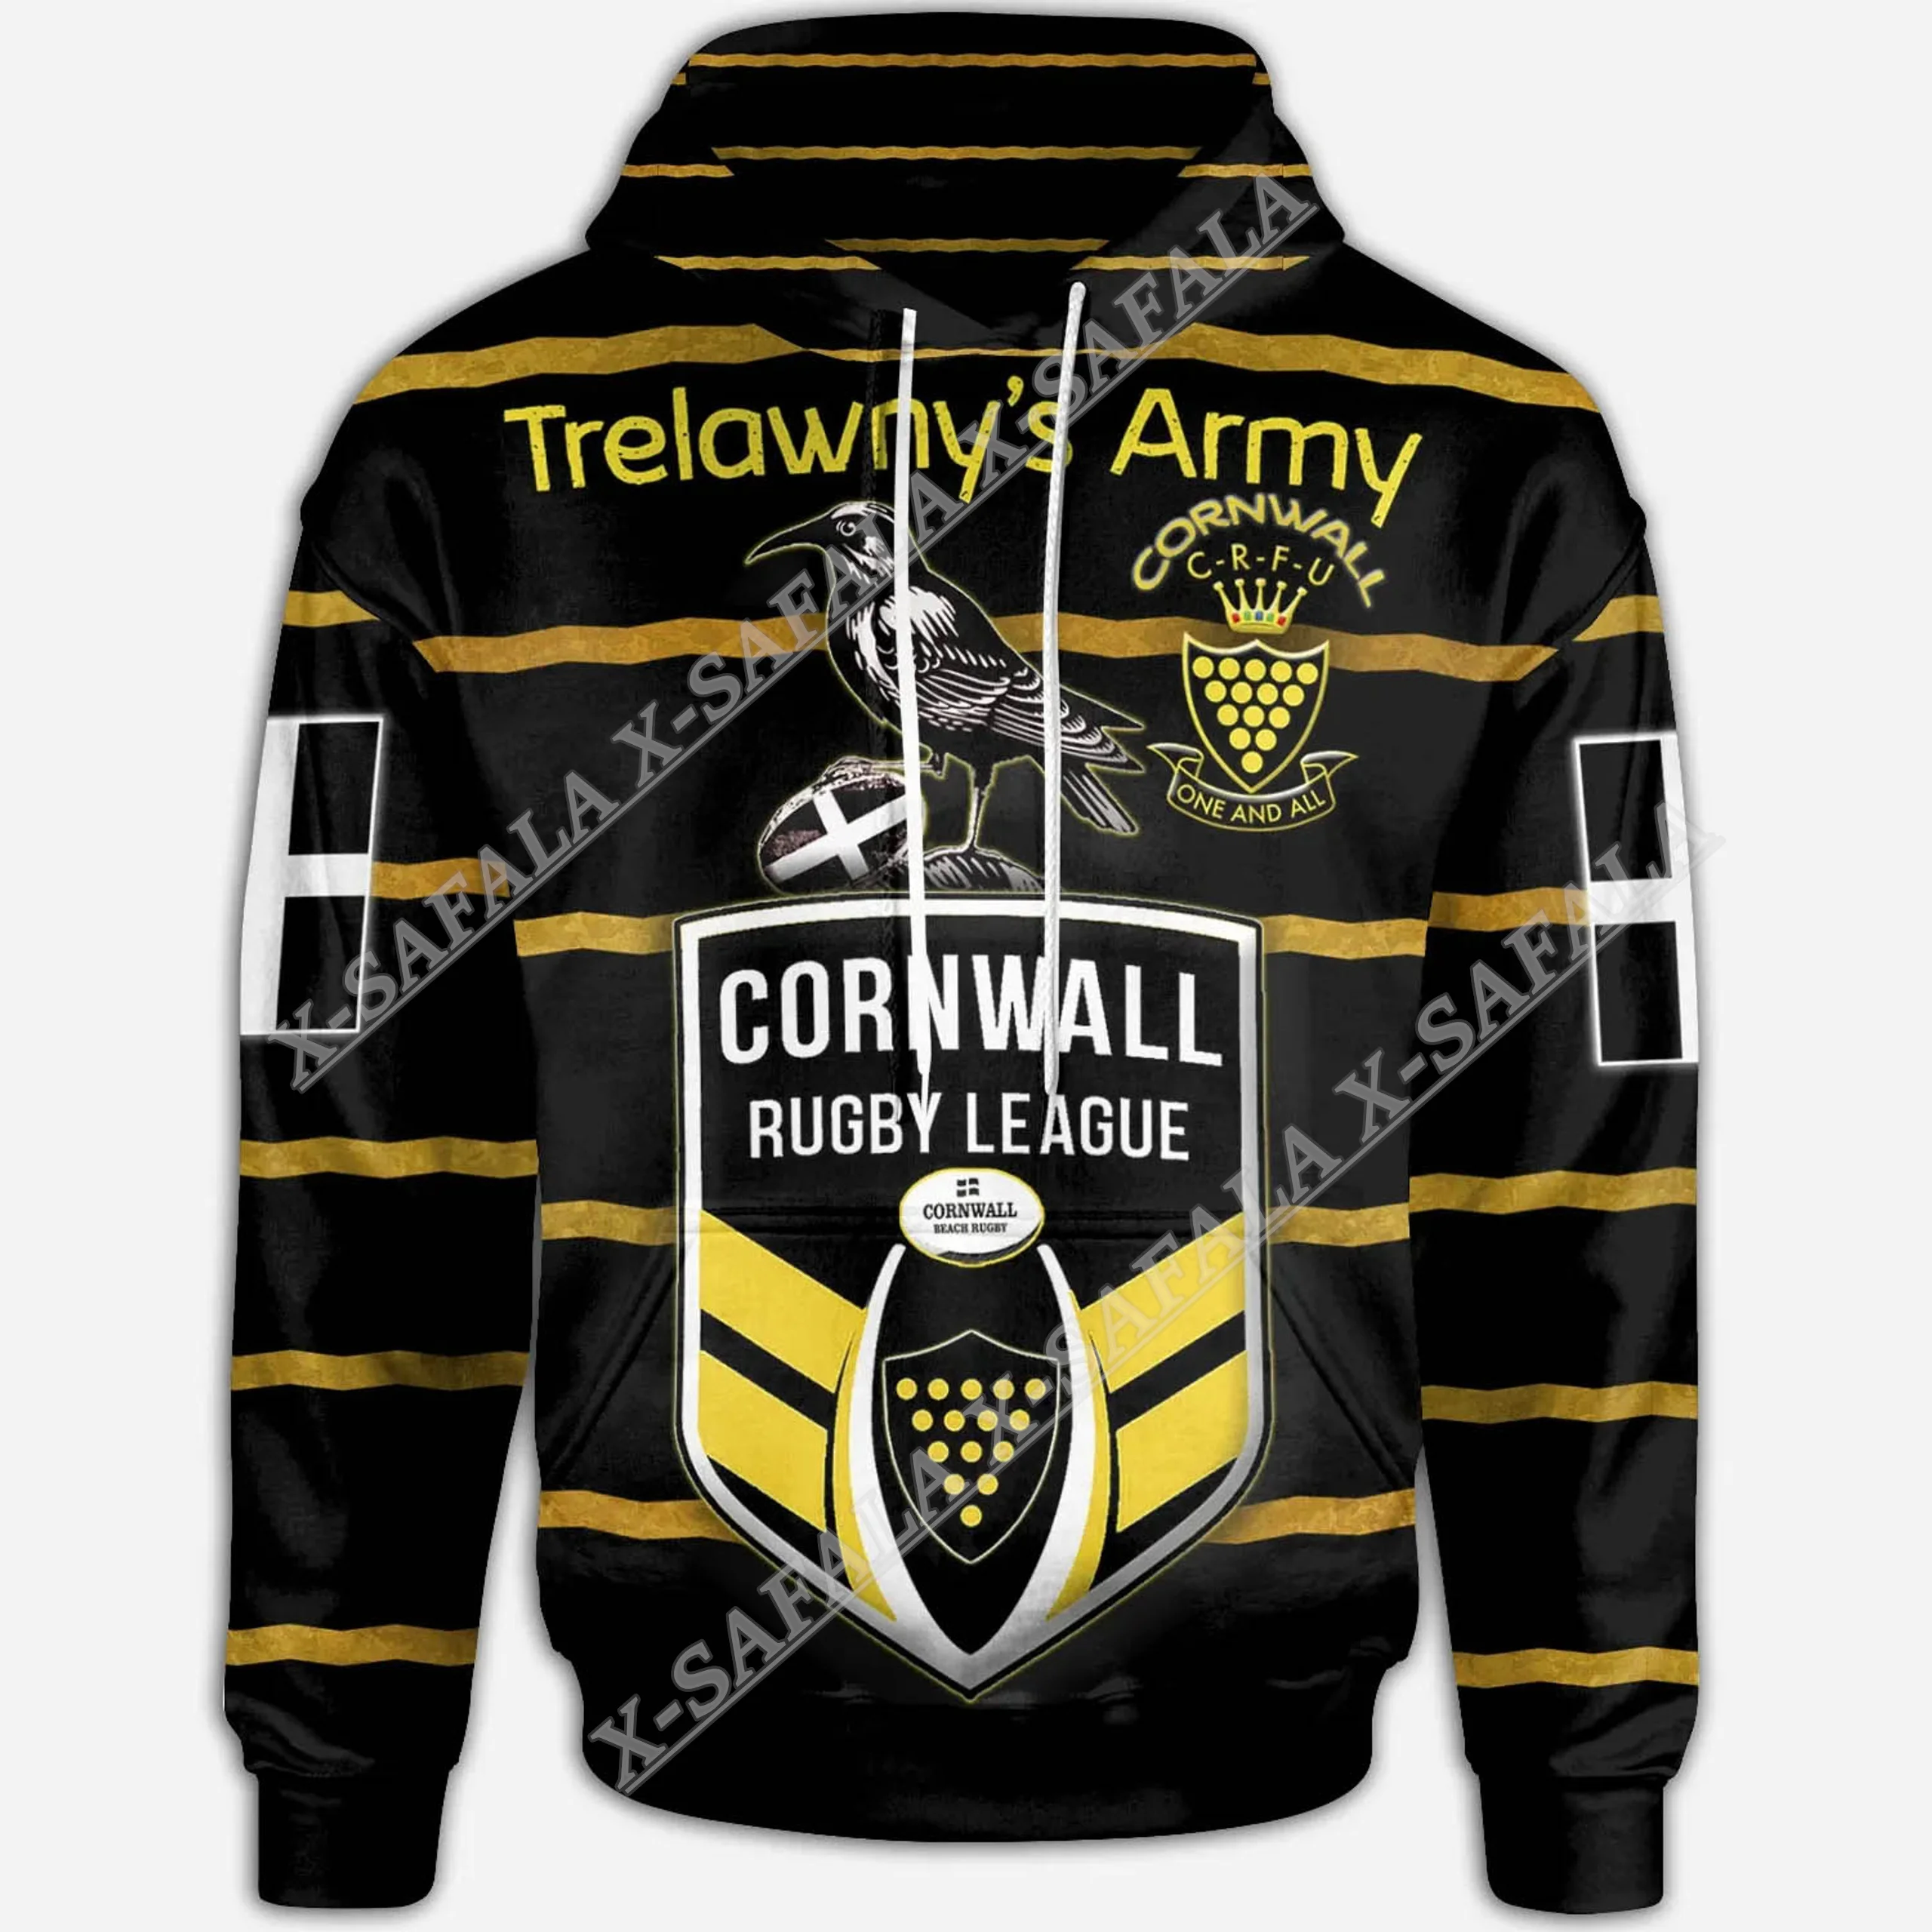 

Celtic Cornwall Rugby League Army Flag 3D Print Zipper Hoodie Men Pullover Sweatshirt Hooded Jersey Tracksuit Outwear Coat